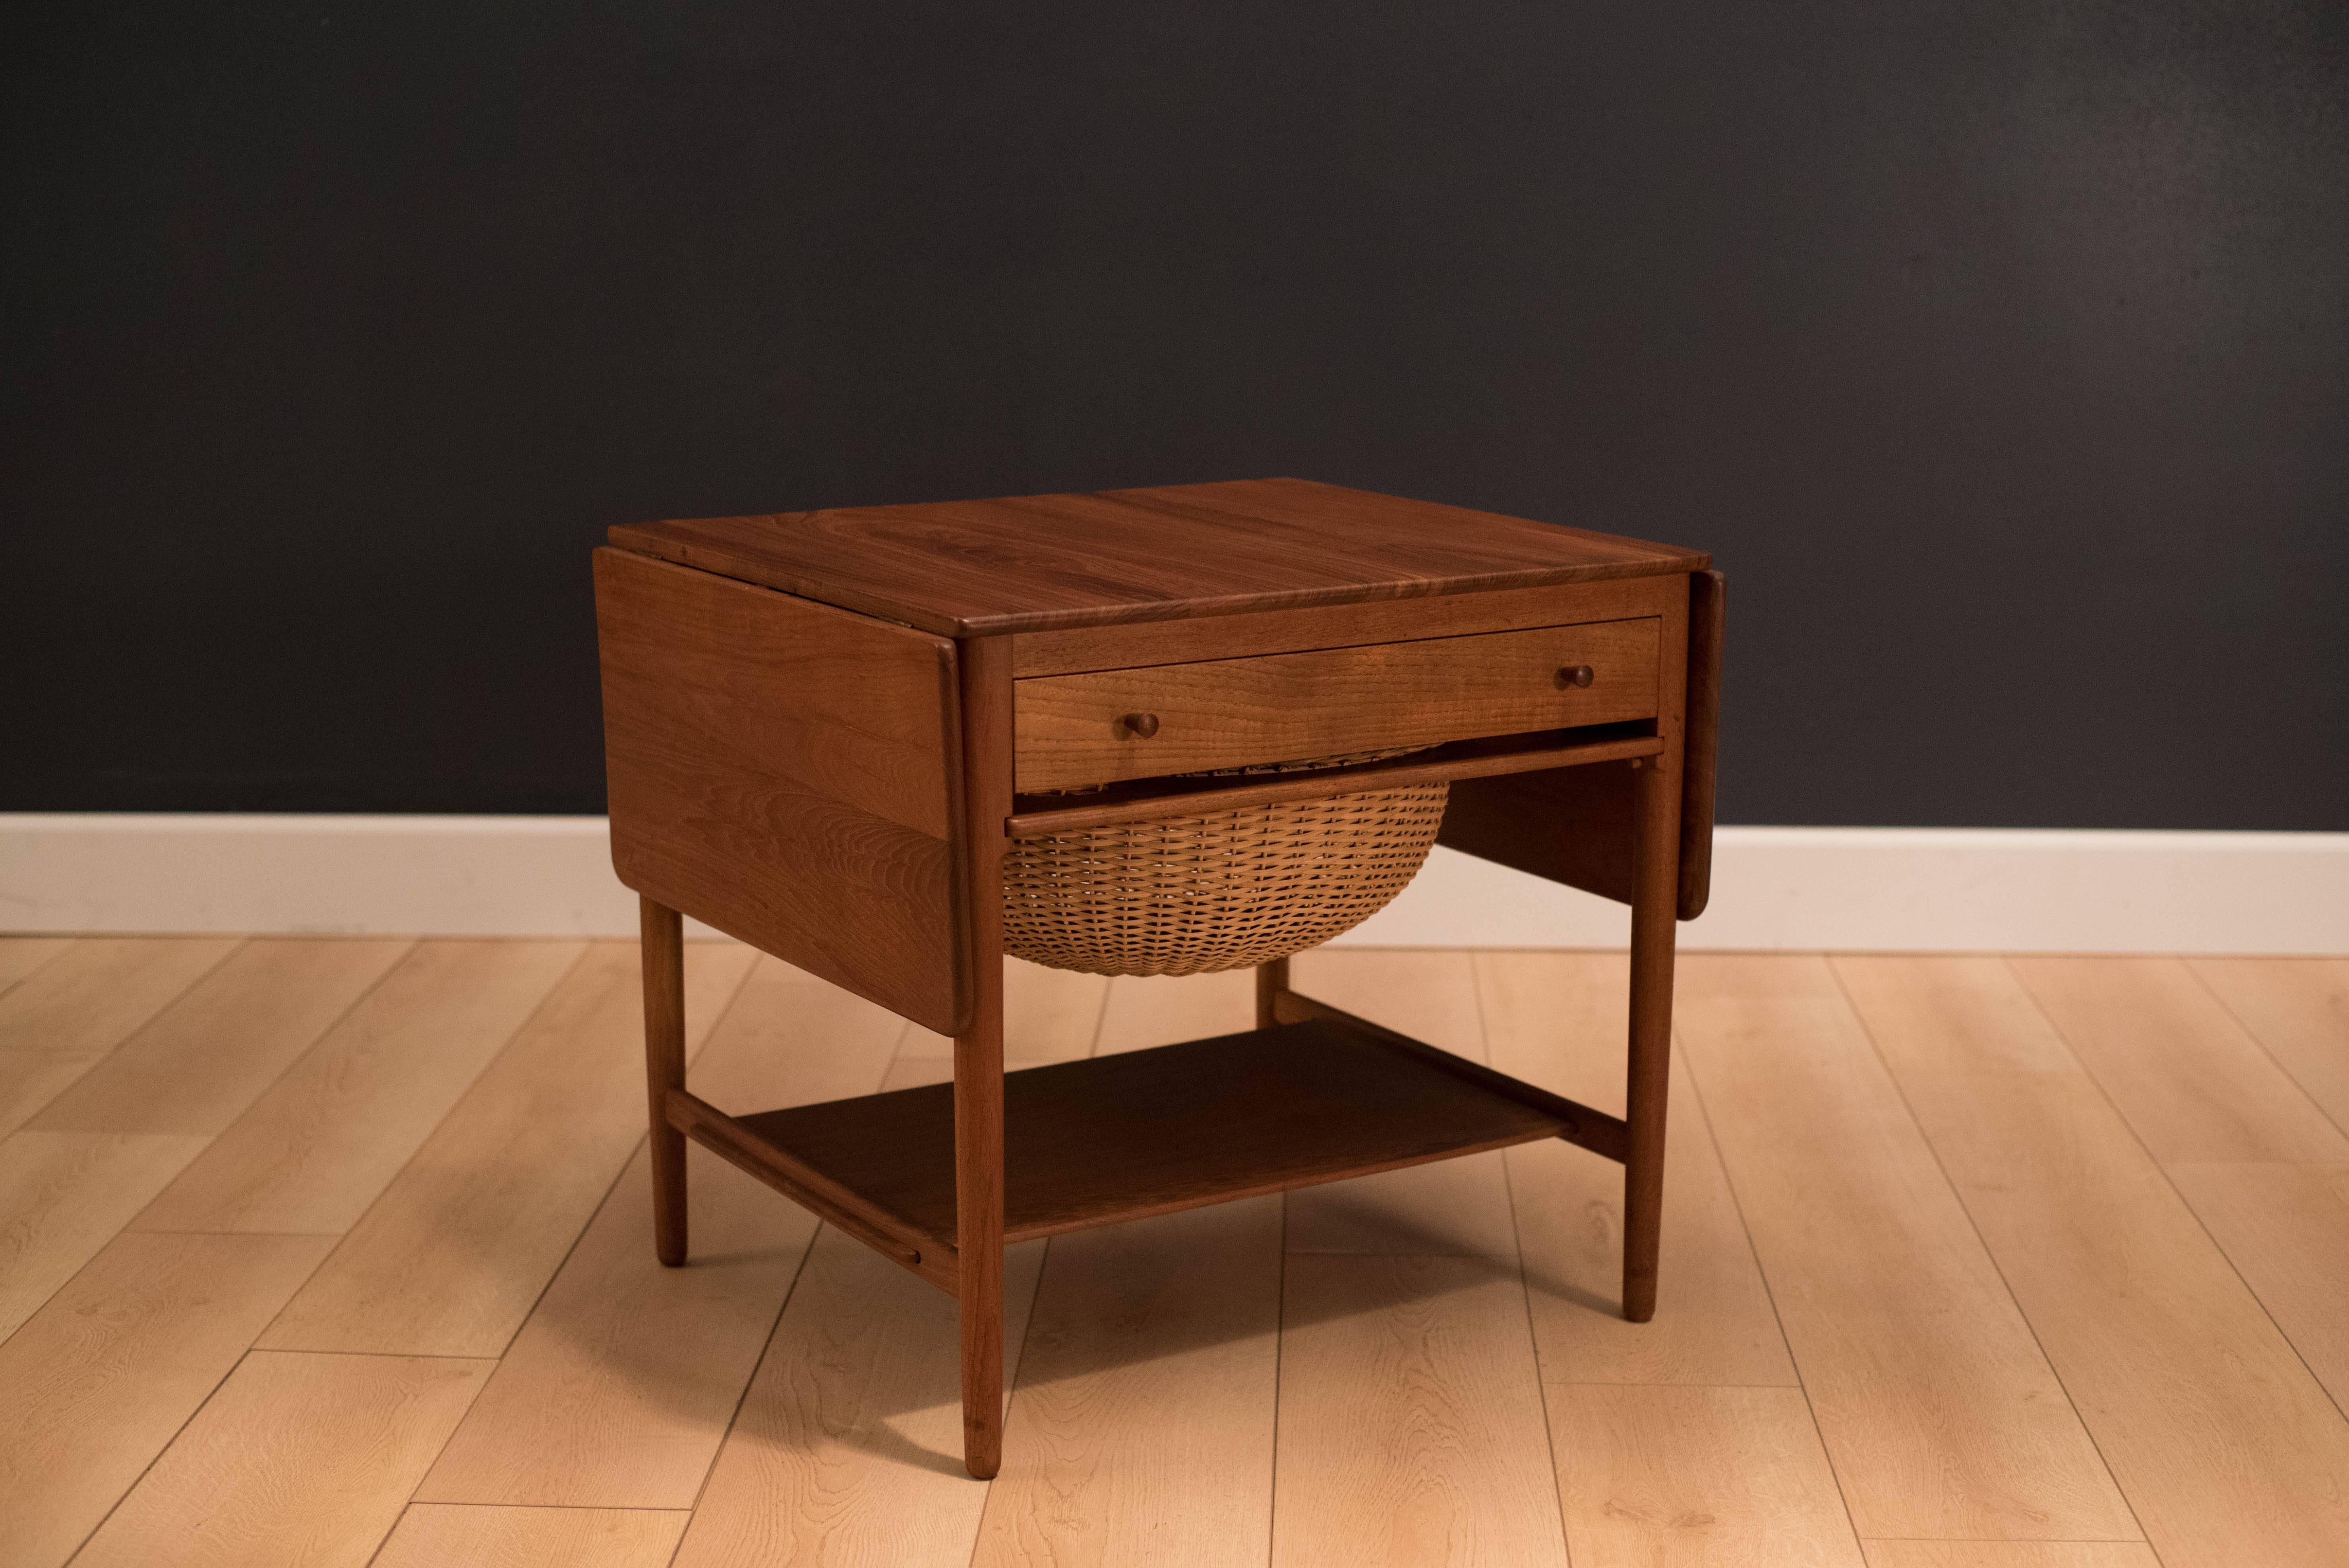 Mid-Century Danish sewing table designed by Hans Wegner for Andreas Tuck. This piece is constructed of solid teak and oak and features an extendable drop-leaf tabletop. Includes one drawer and pull-out wicker basket tray. Tabletop extends out to